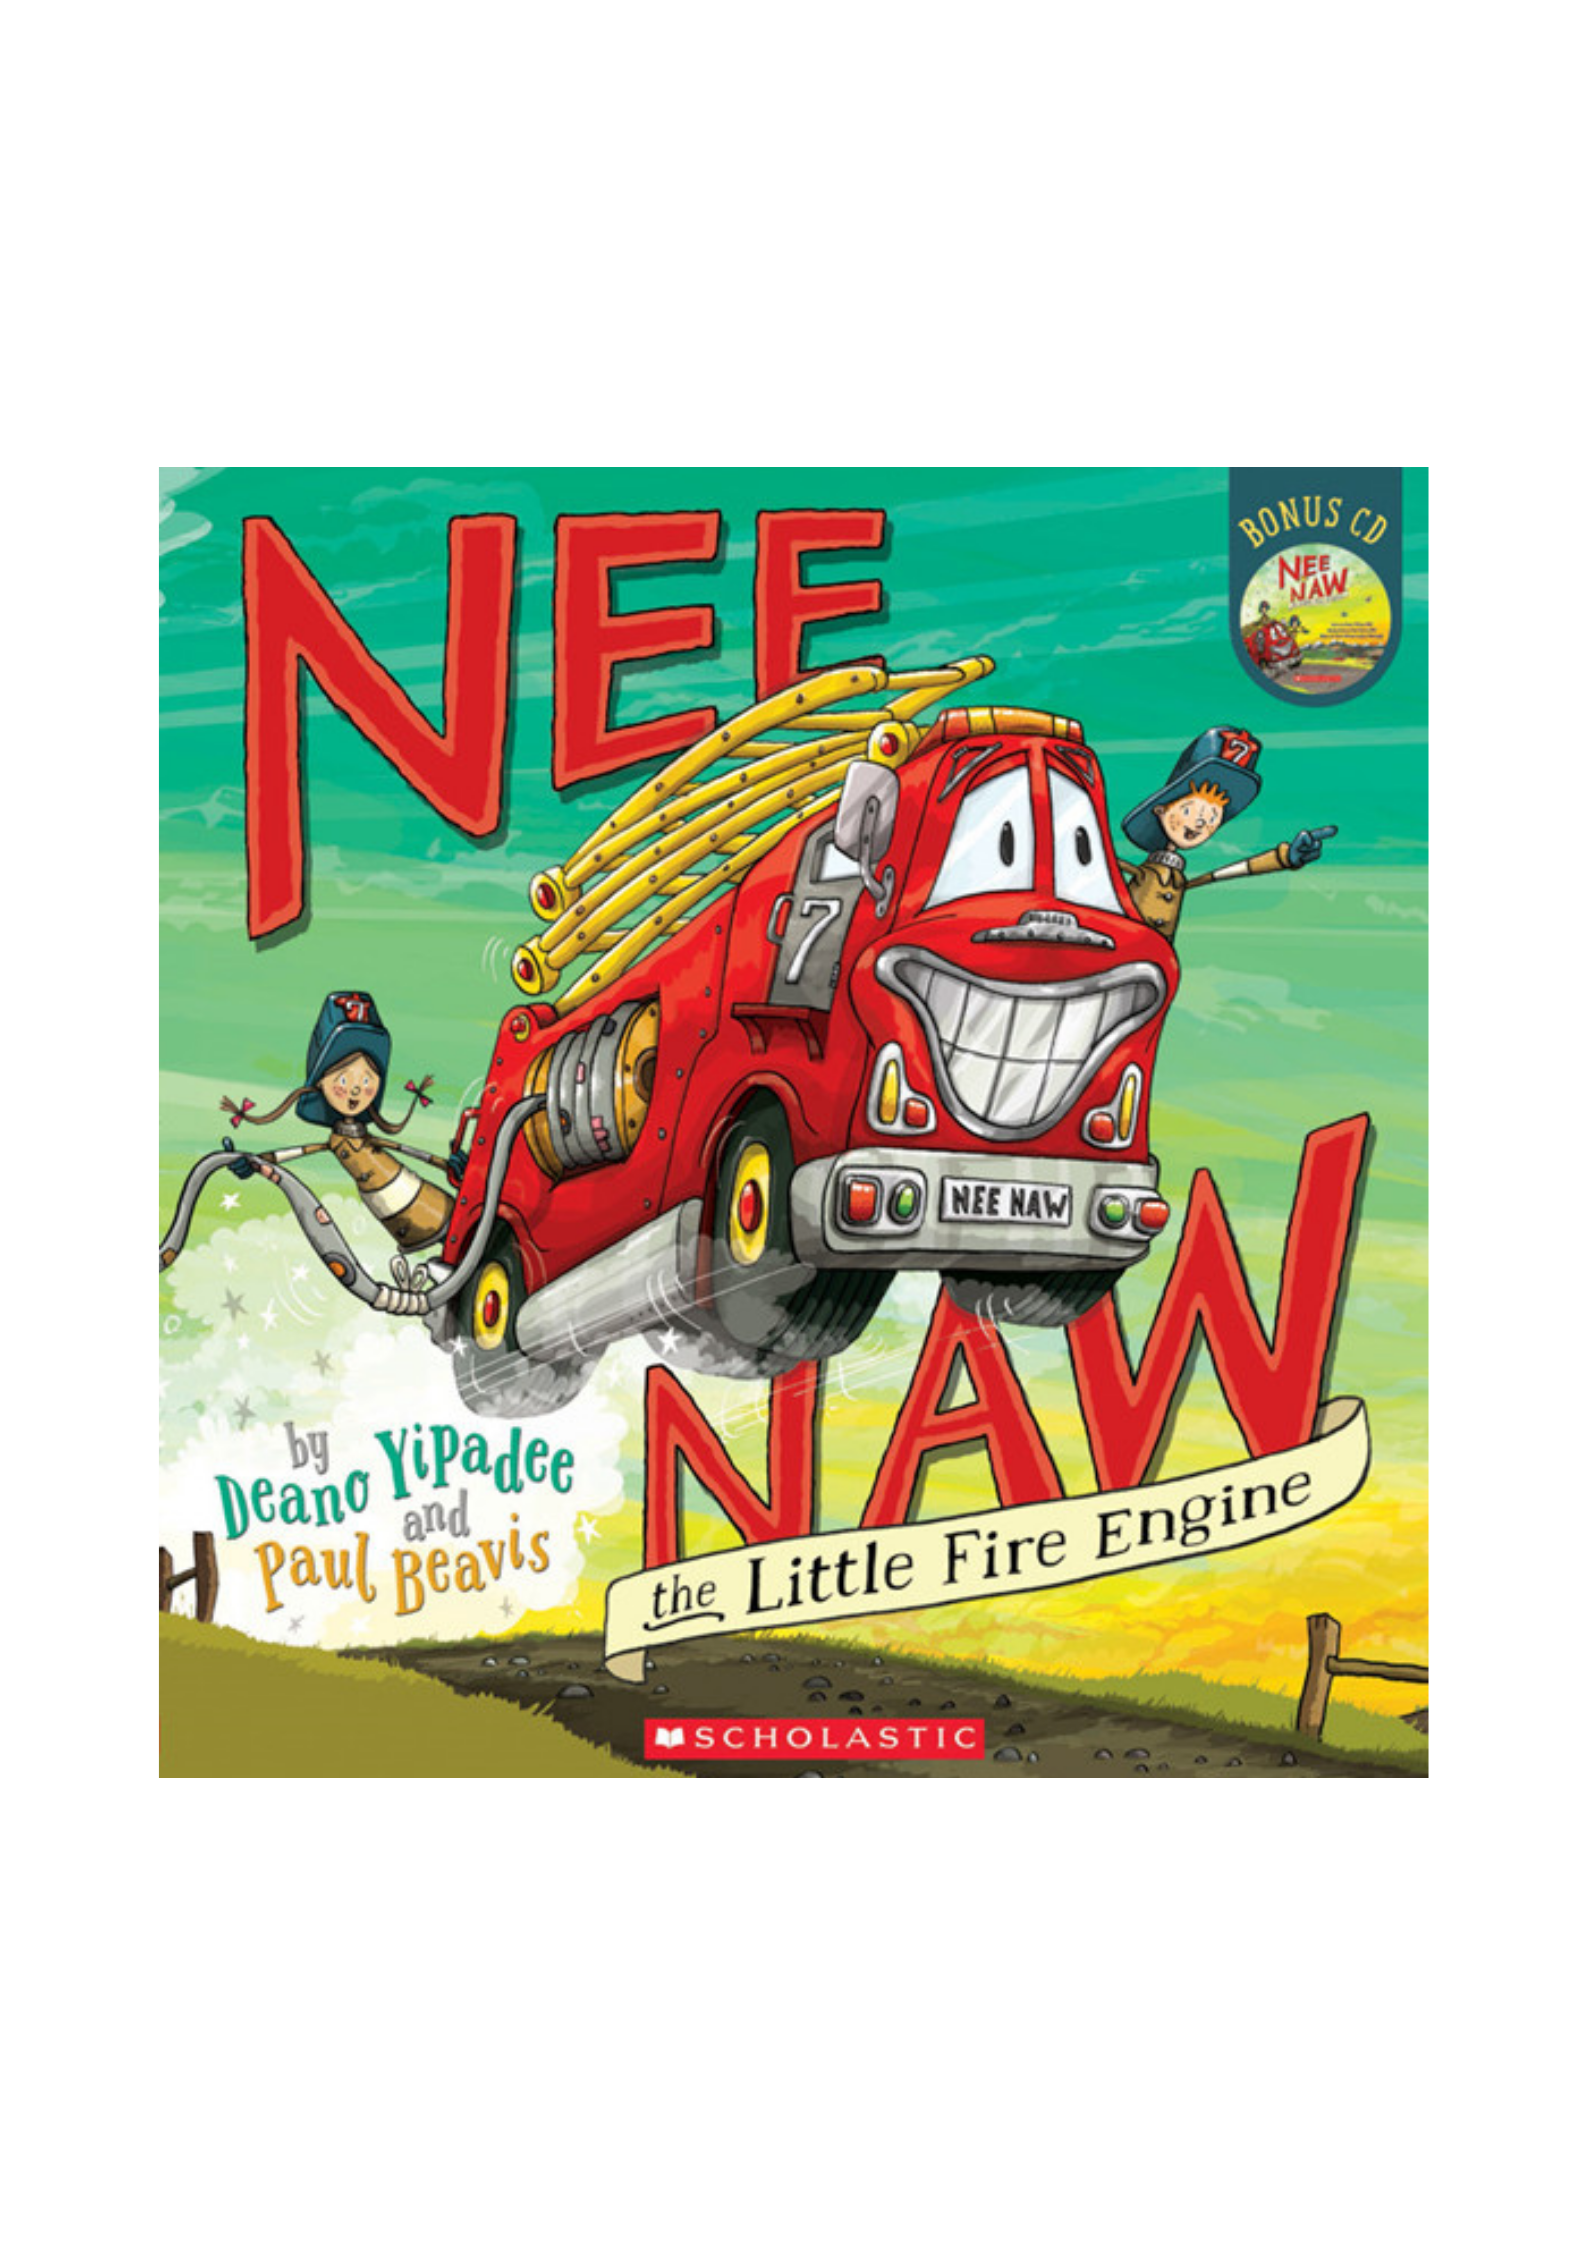 Nee Naw – the Little Fire Engine